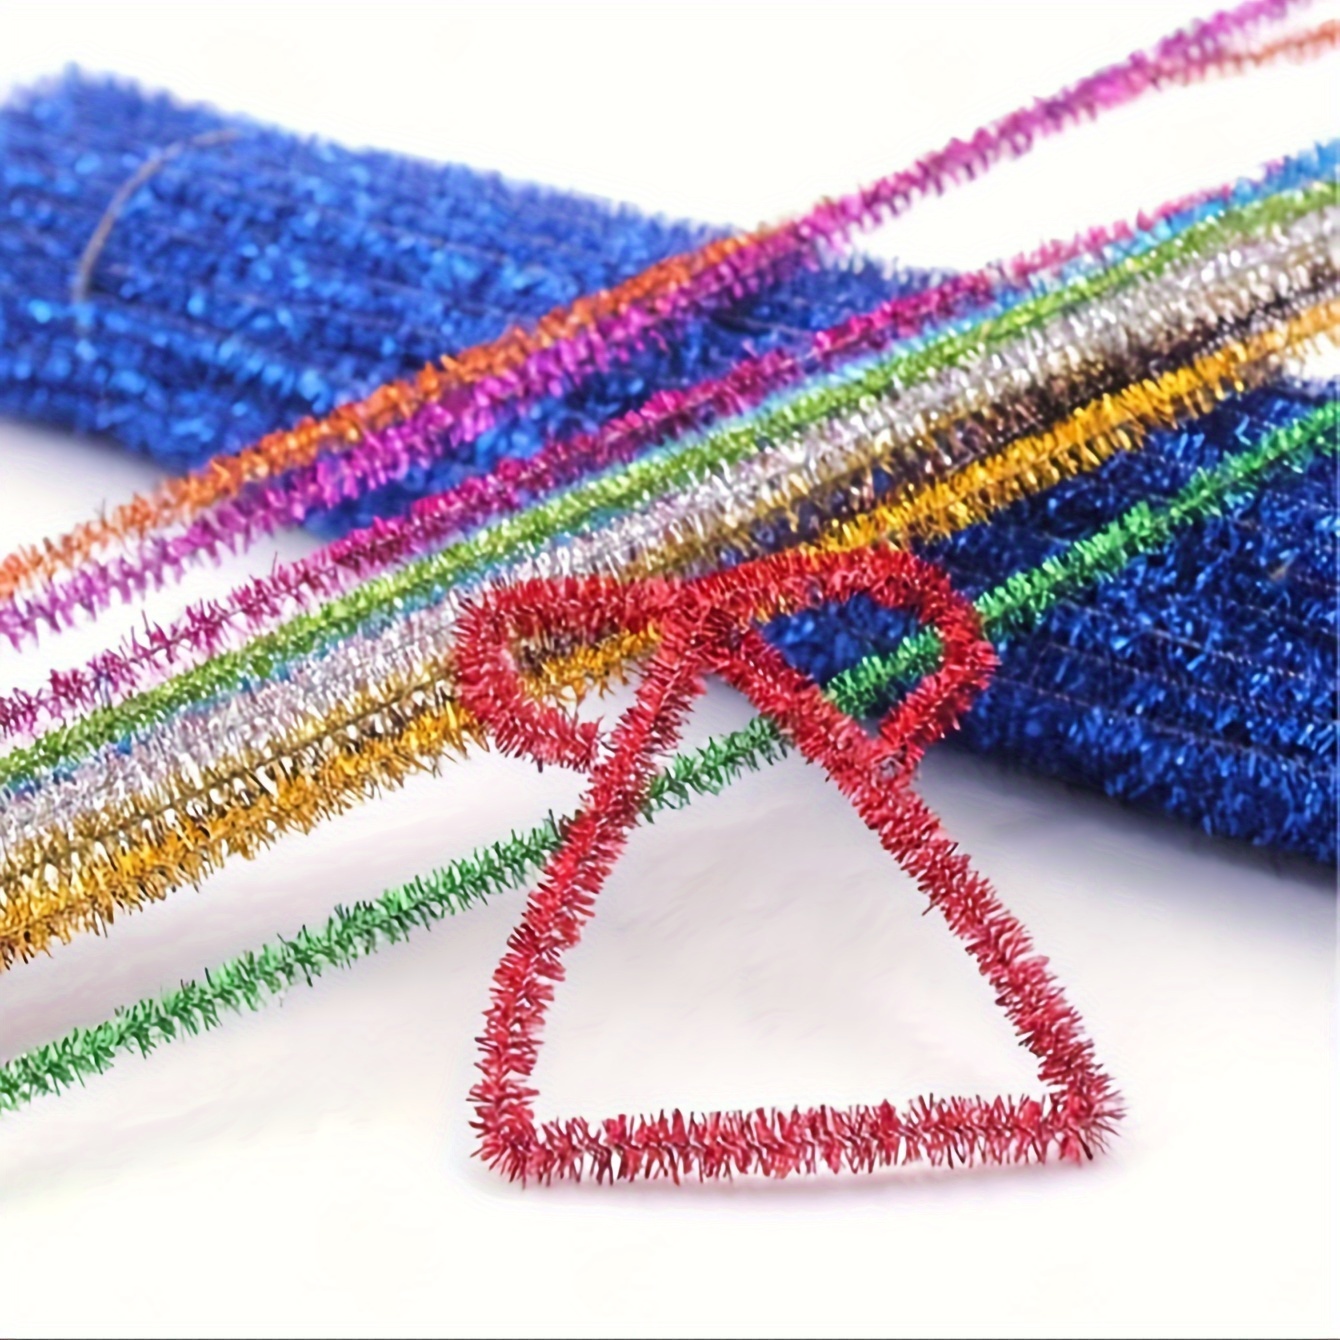  Factory Direct Craft Pastel Bumpy Pipe Cleaners